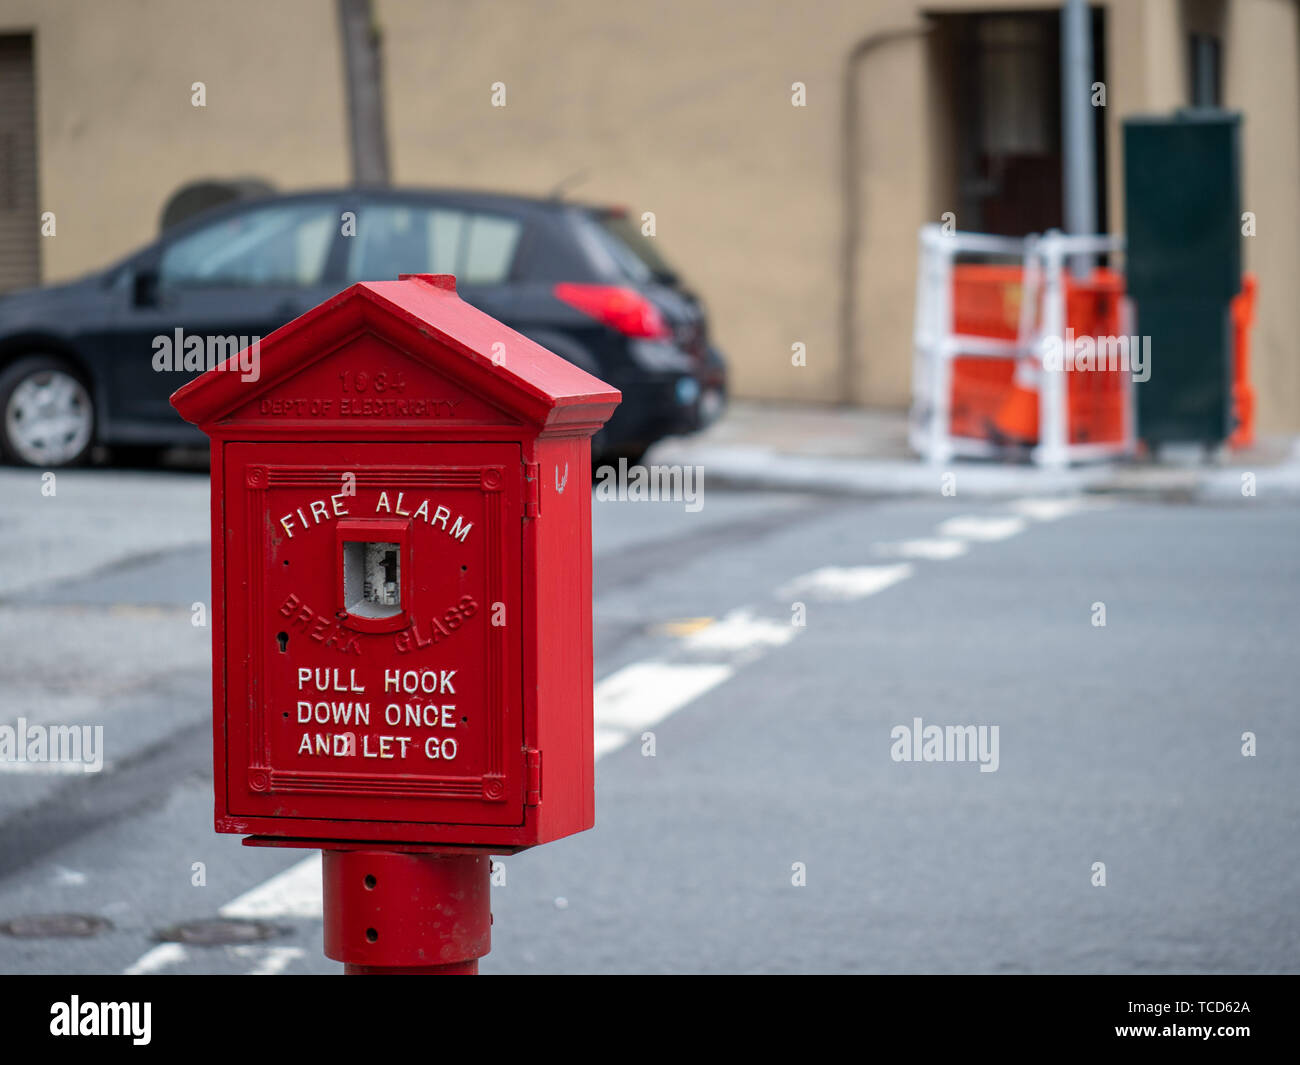 Weathered, old red fire alarm call box on street corner outside  Stock Photo